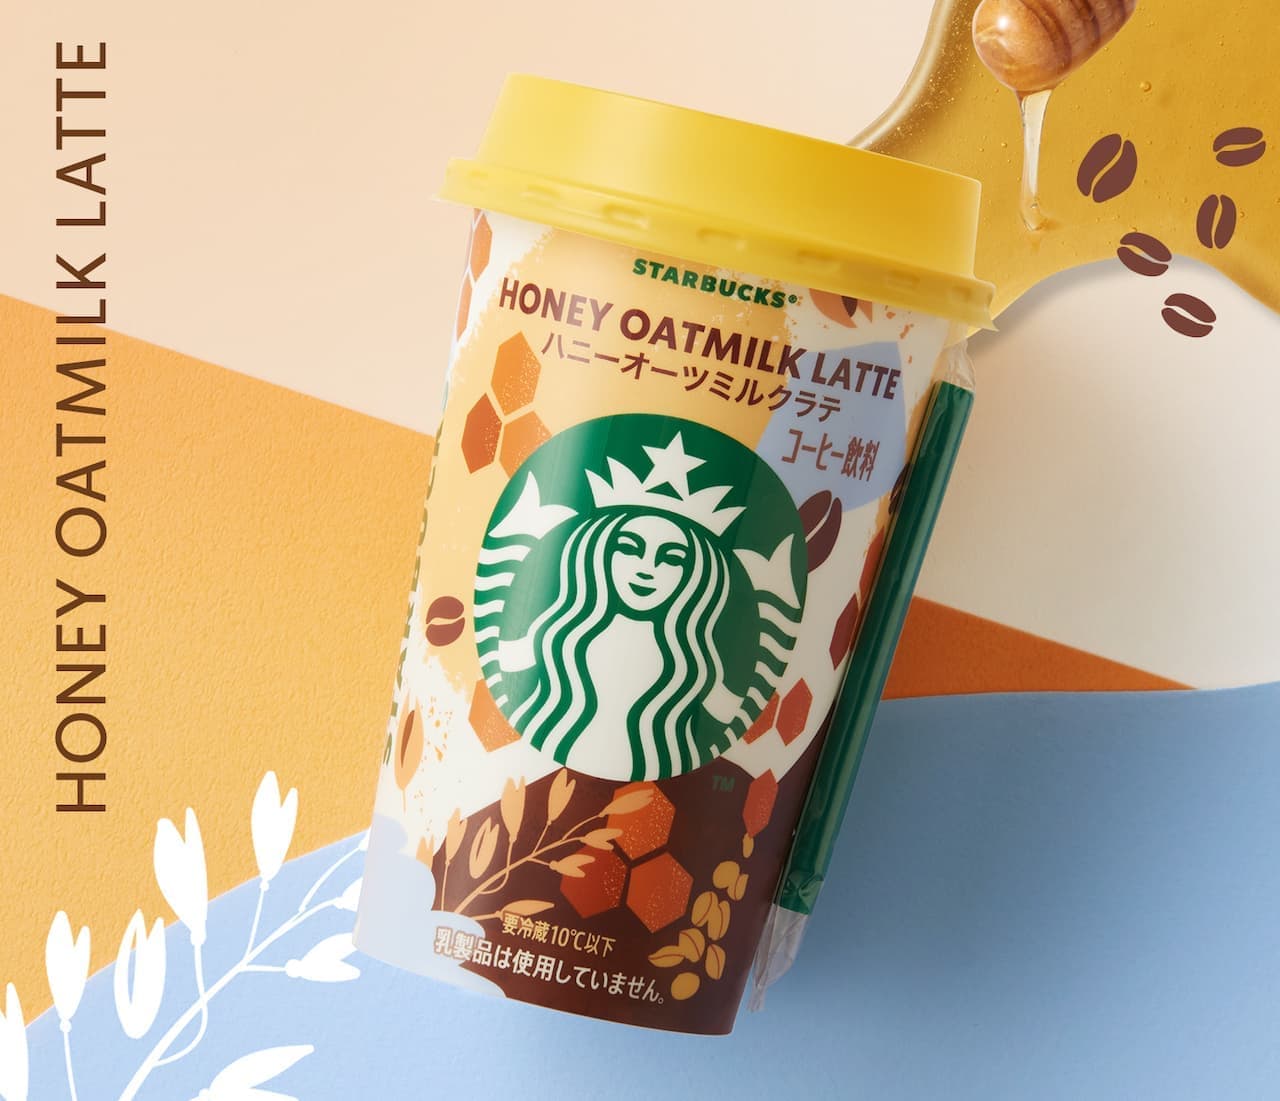 Starbucks Chilled Cup Honey Oats Milk Latte Limited Time Offer